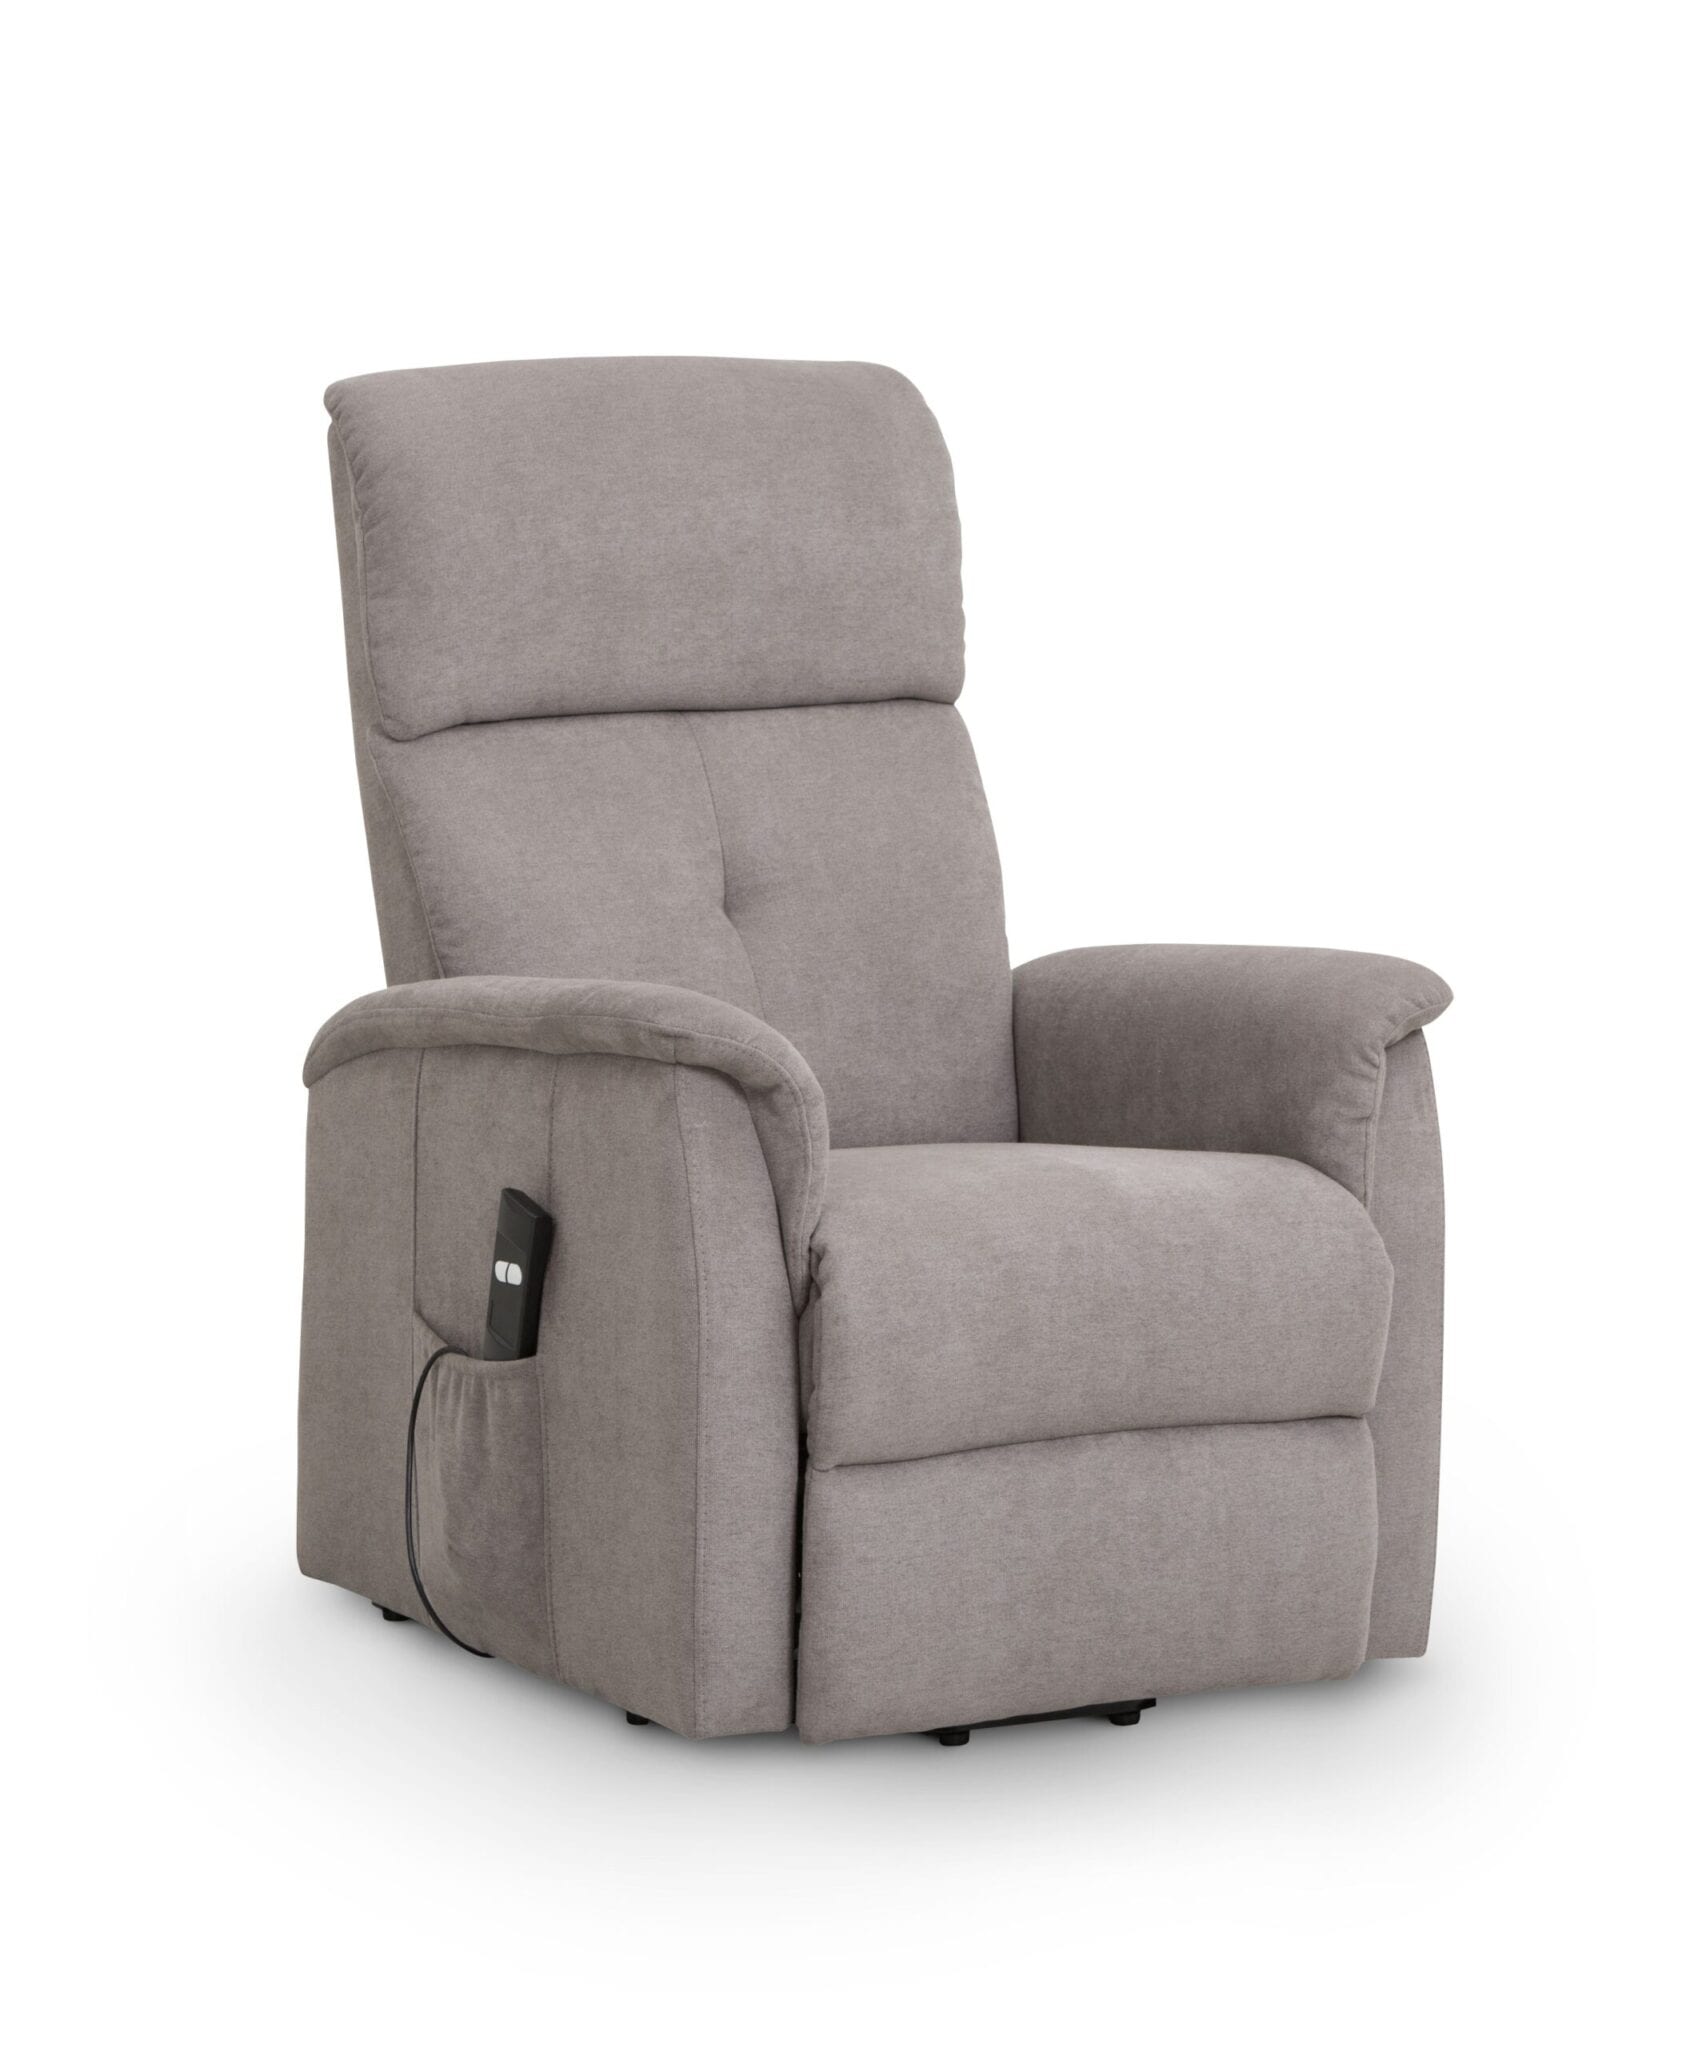 Avangeline Rise Recline Chair Taupe Fabric